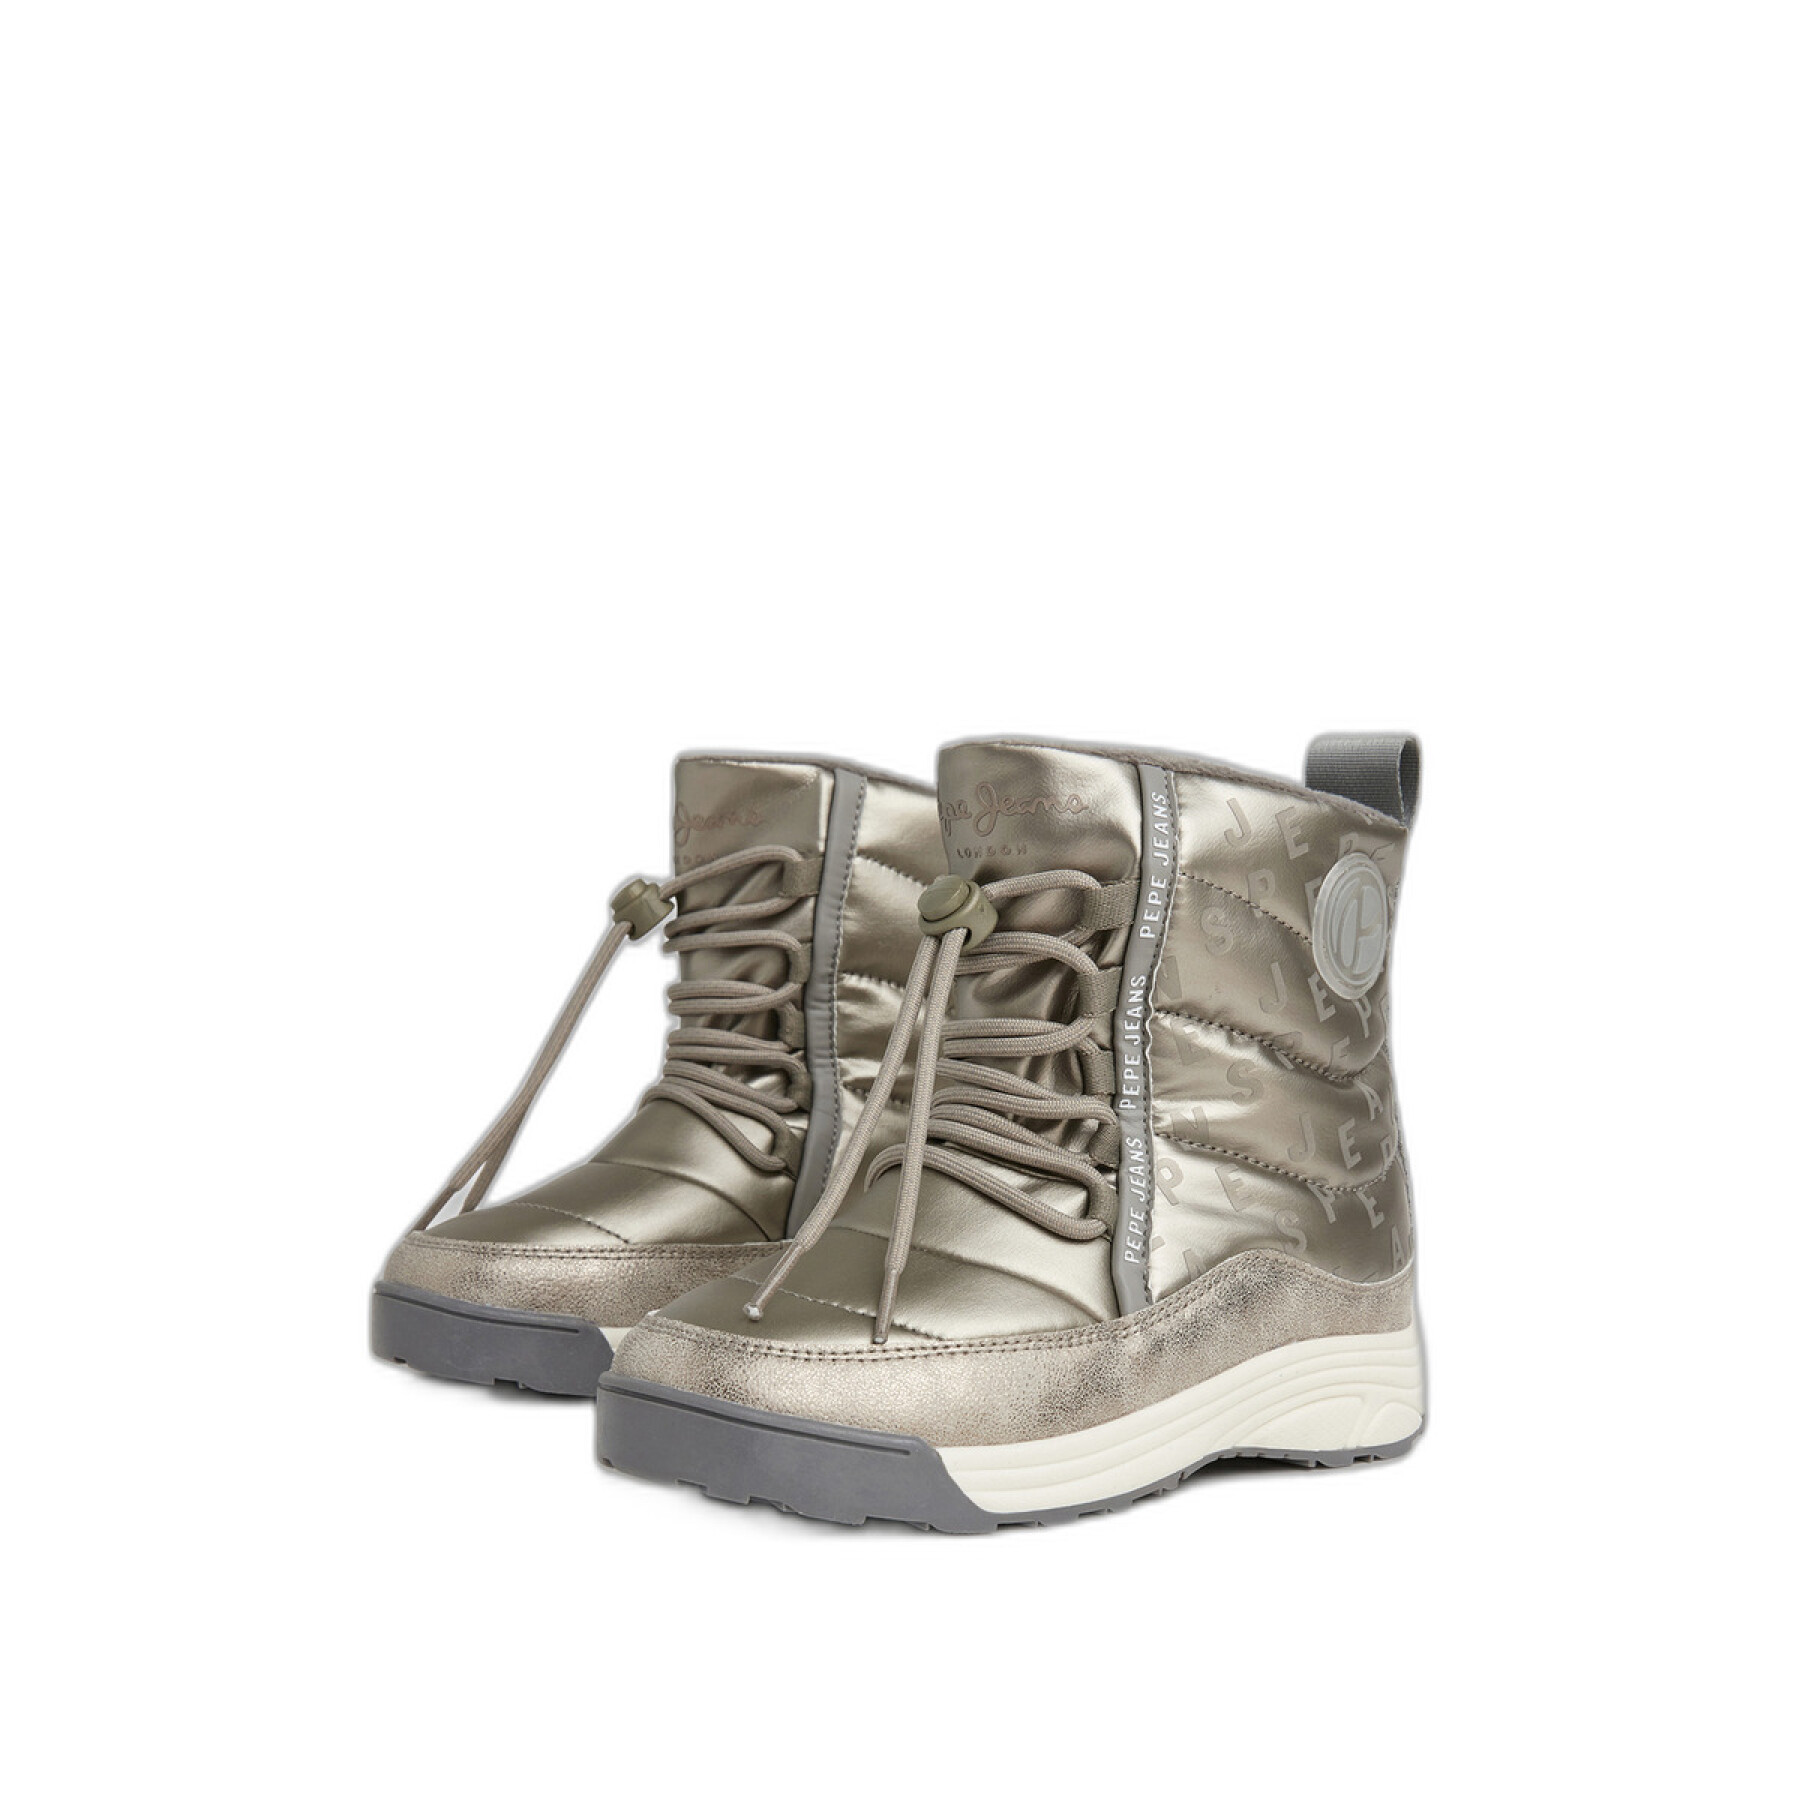 Botas Pepe Jeans Jarvis Trace